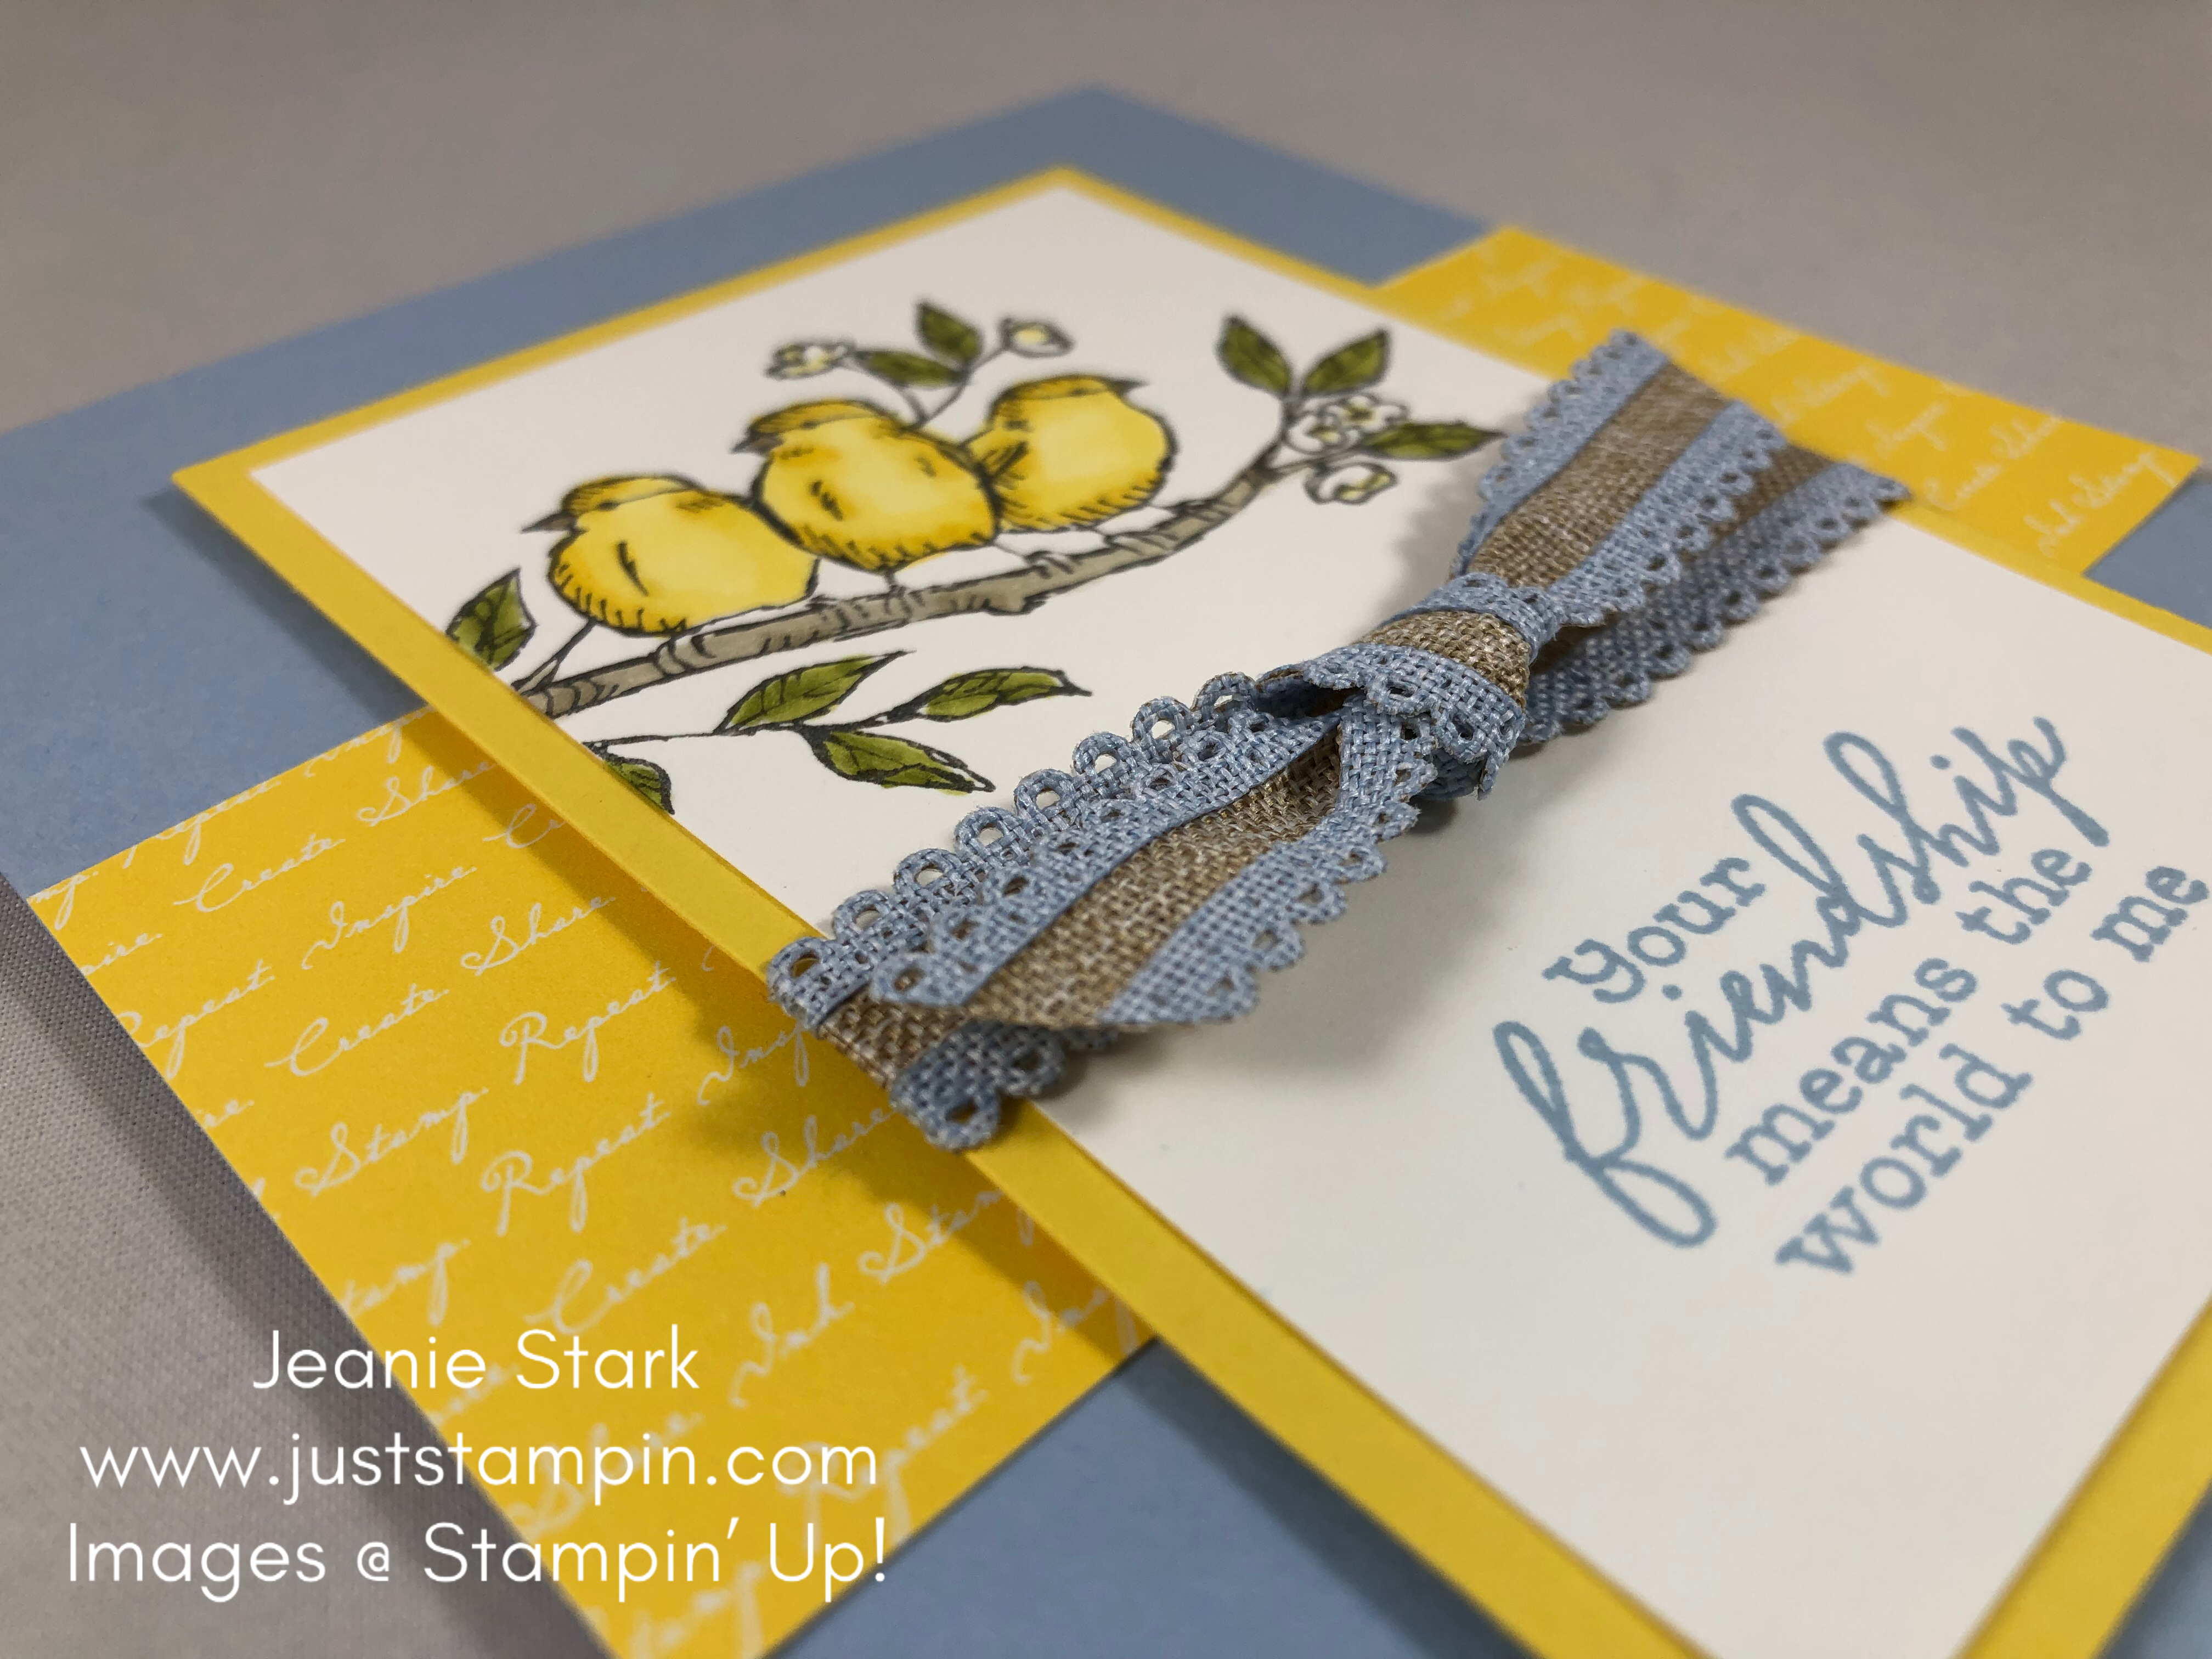 Stampin' Up! Free As A Bird friend card idea - Jeanie Stark StampinUp